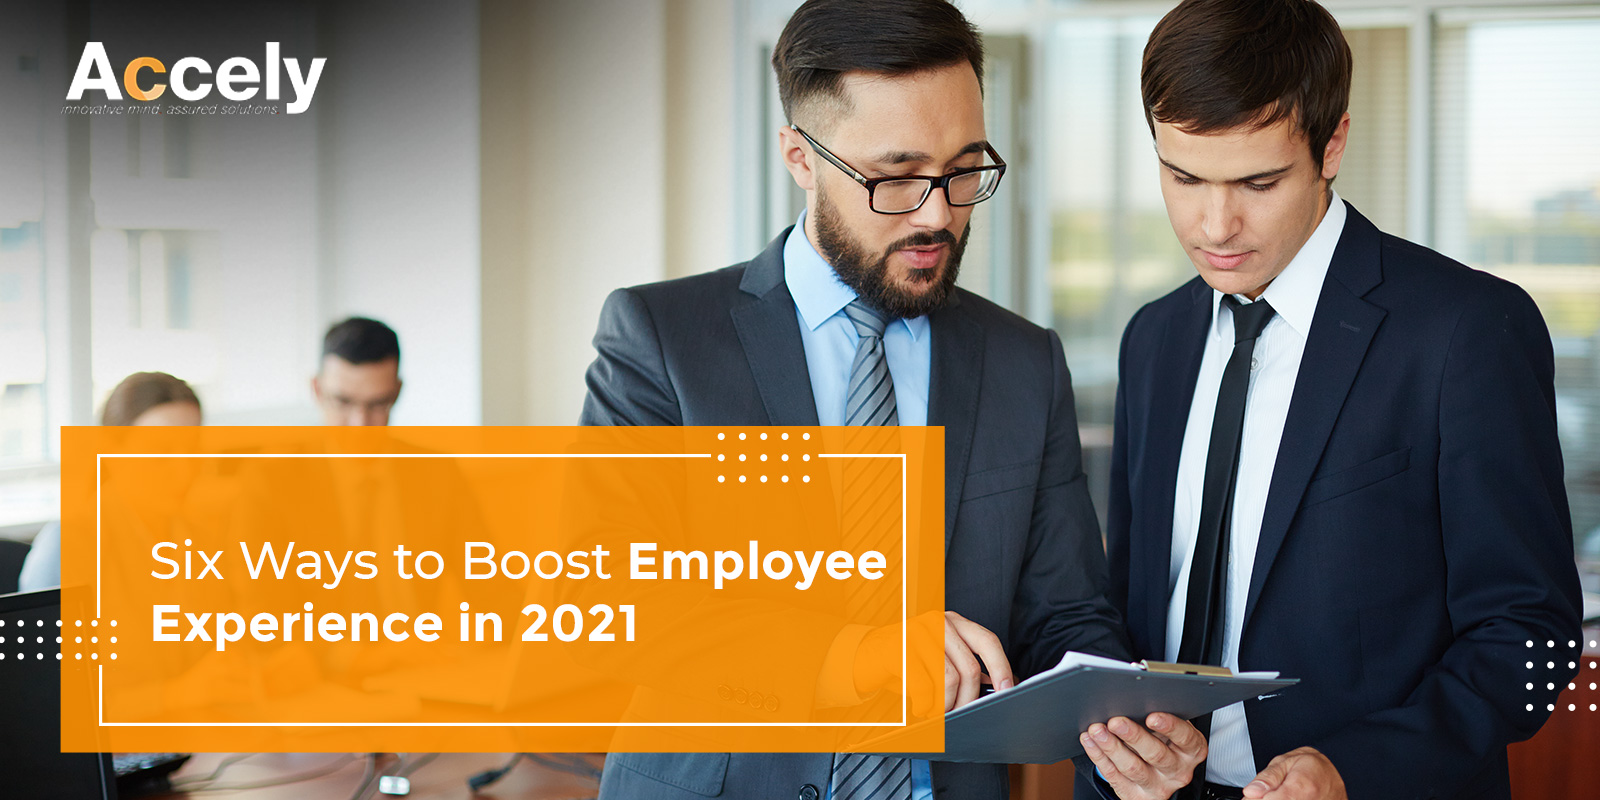 Six Ways to Boost Employee Experience in 2021